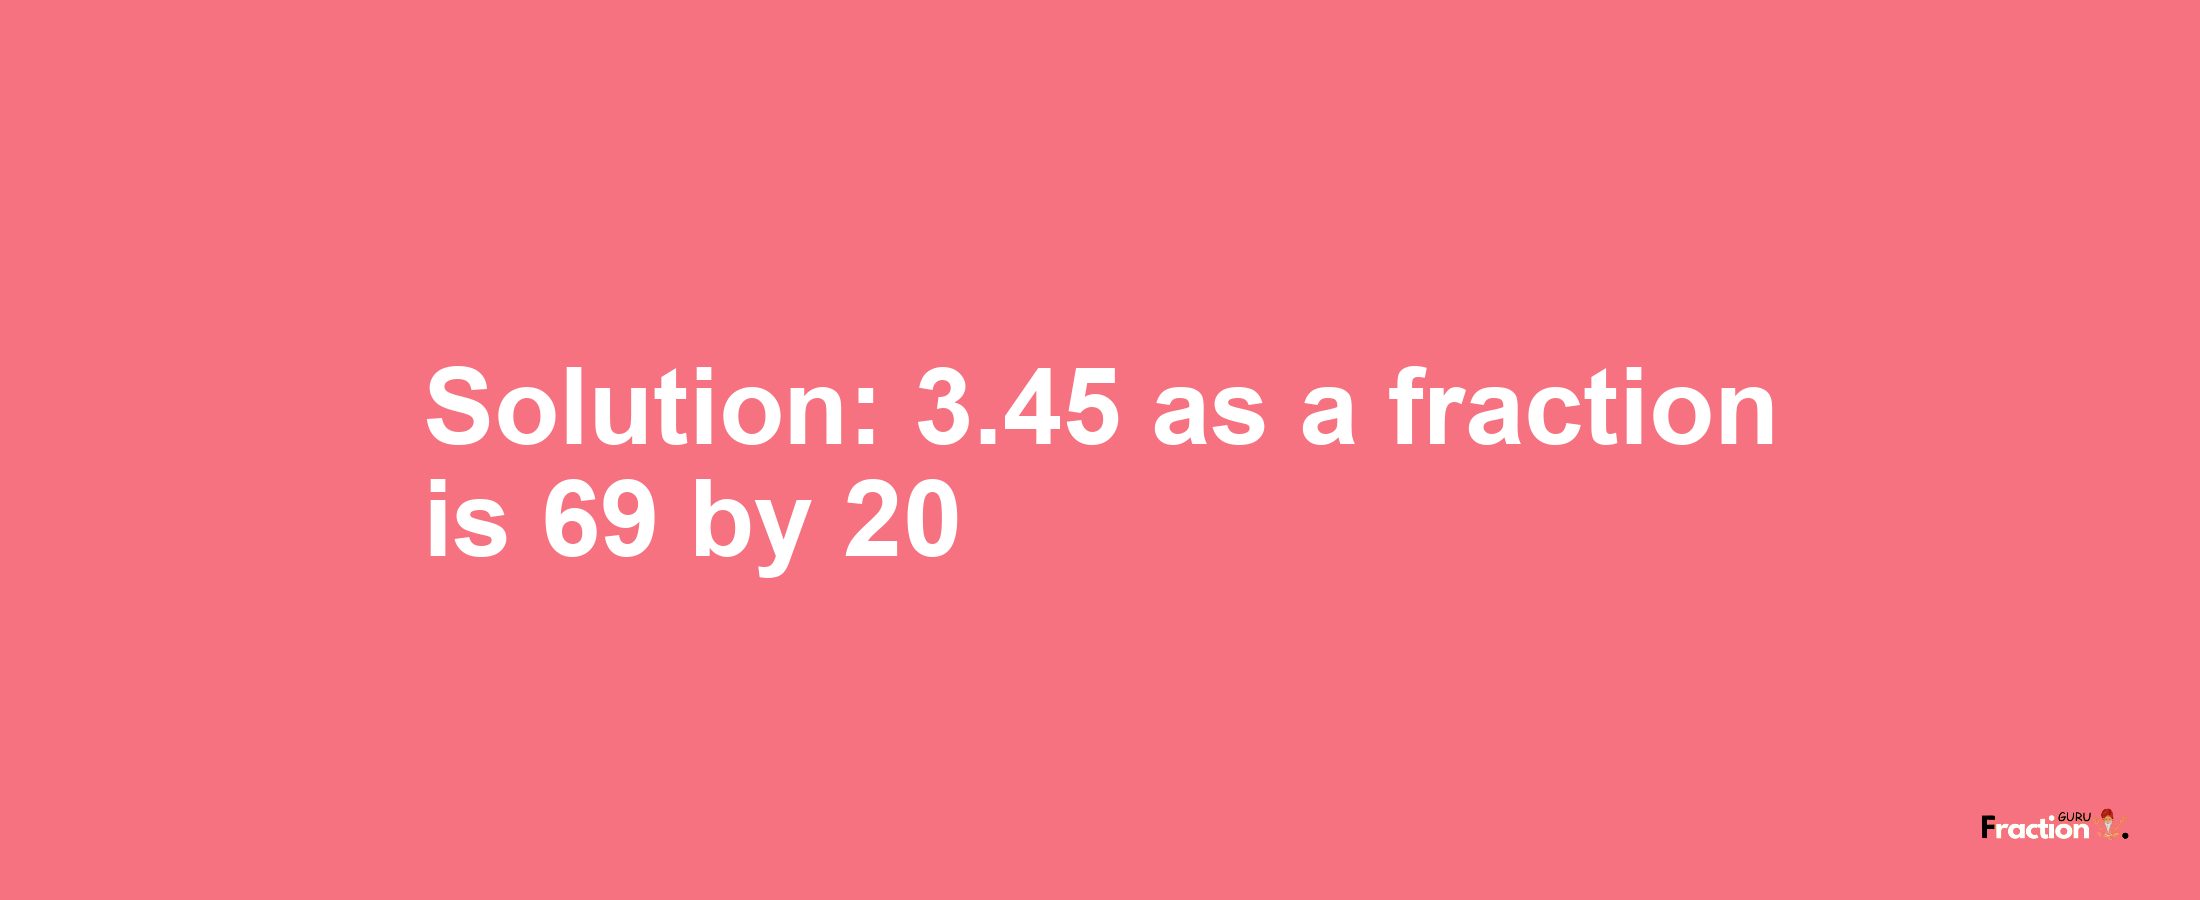 Solution:3.45 as a fraction is 69/20